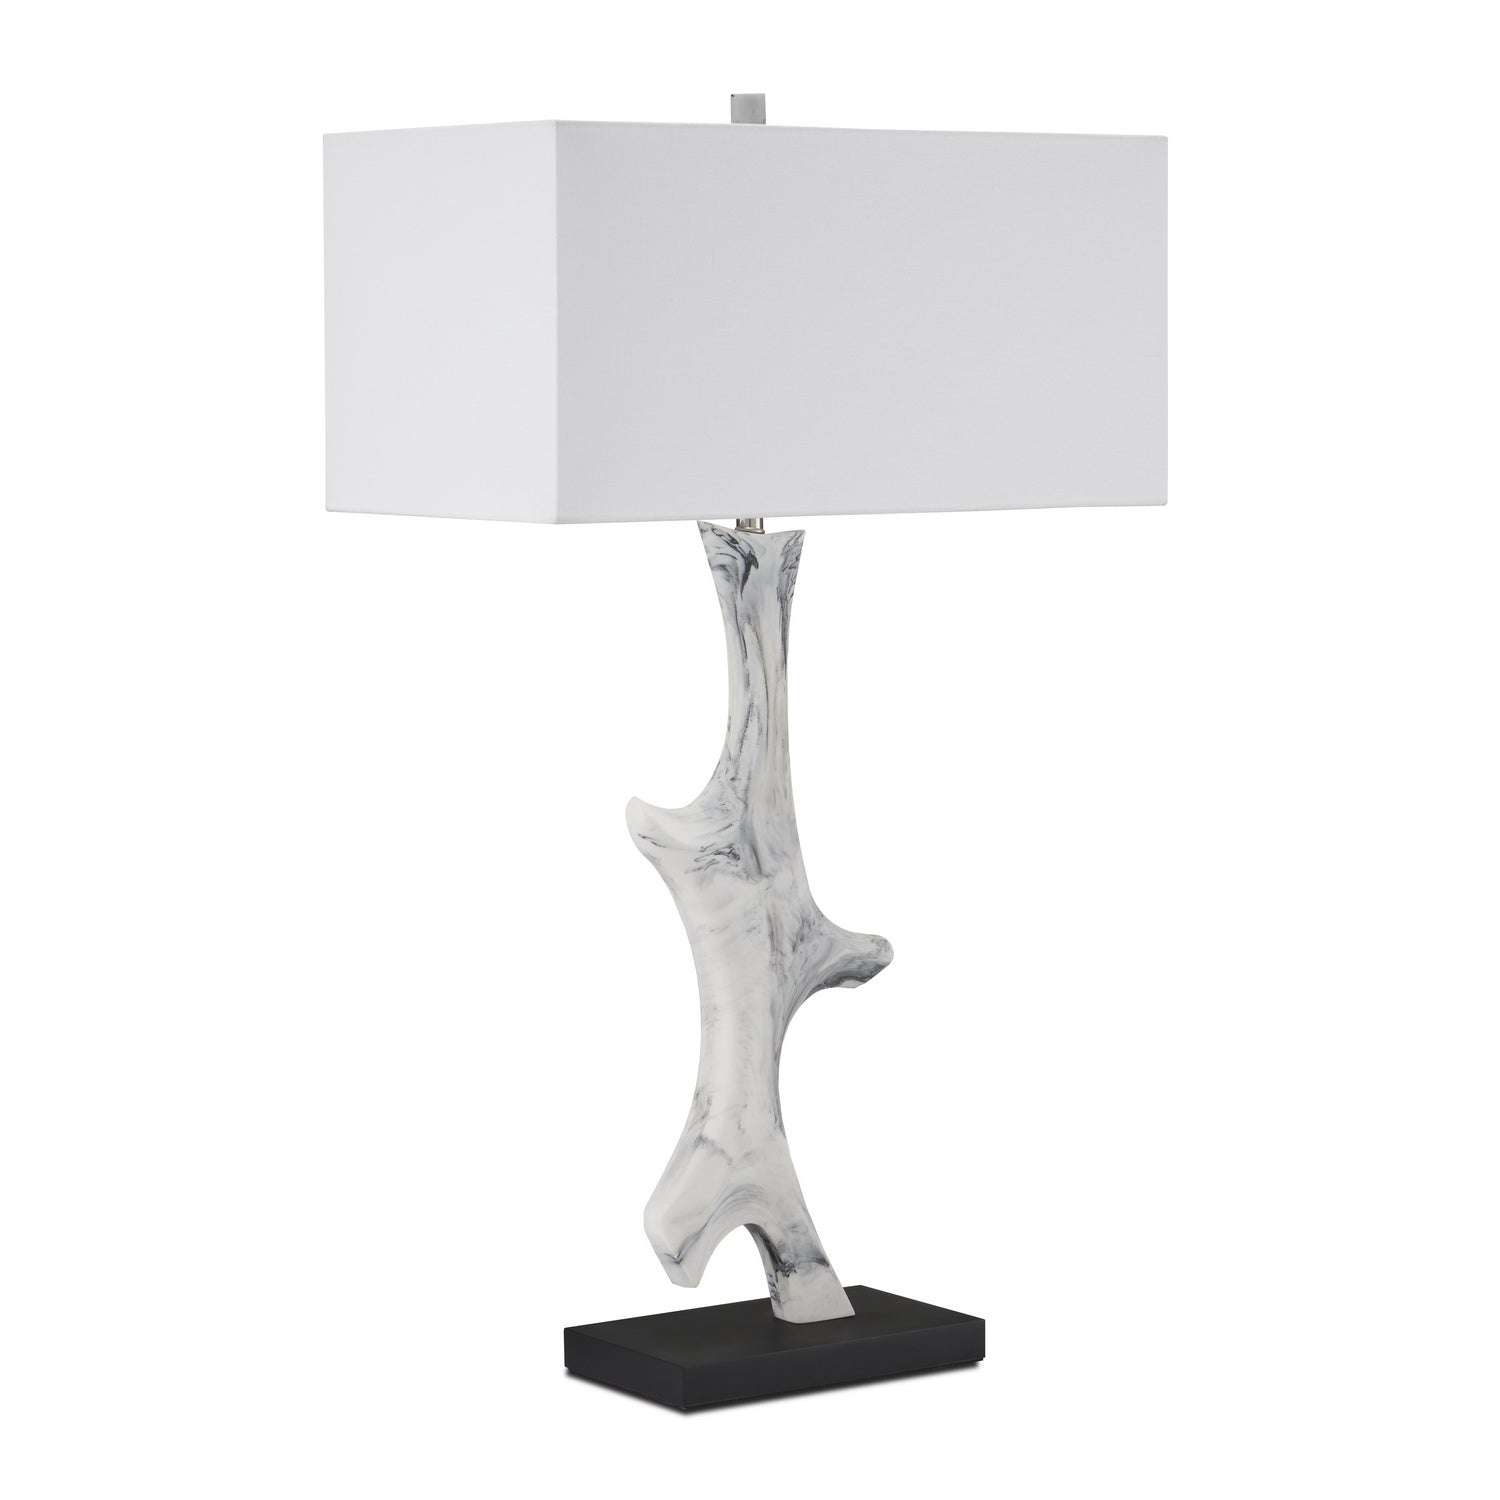 One Light Table Lamp from the Devant collection in White/Gray/Black finish